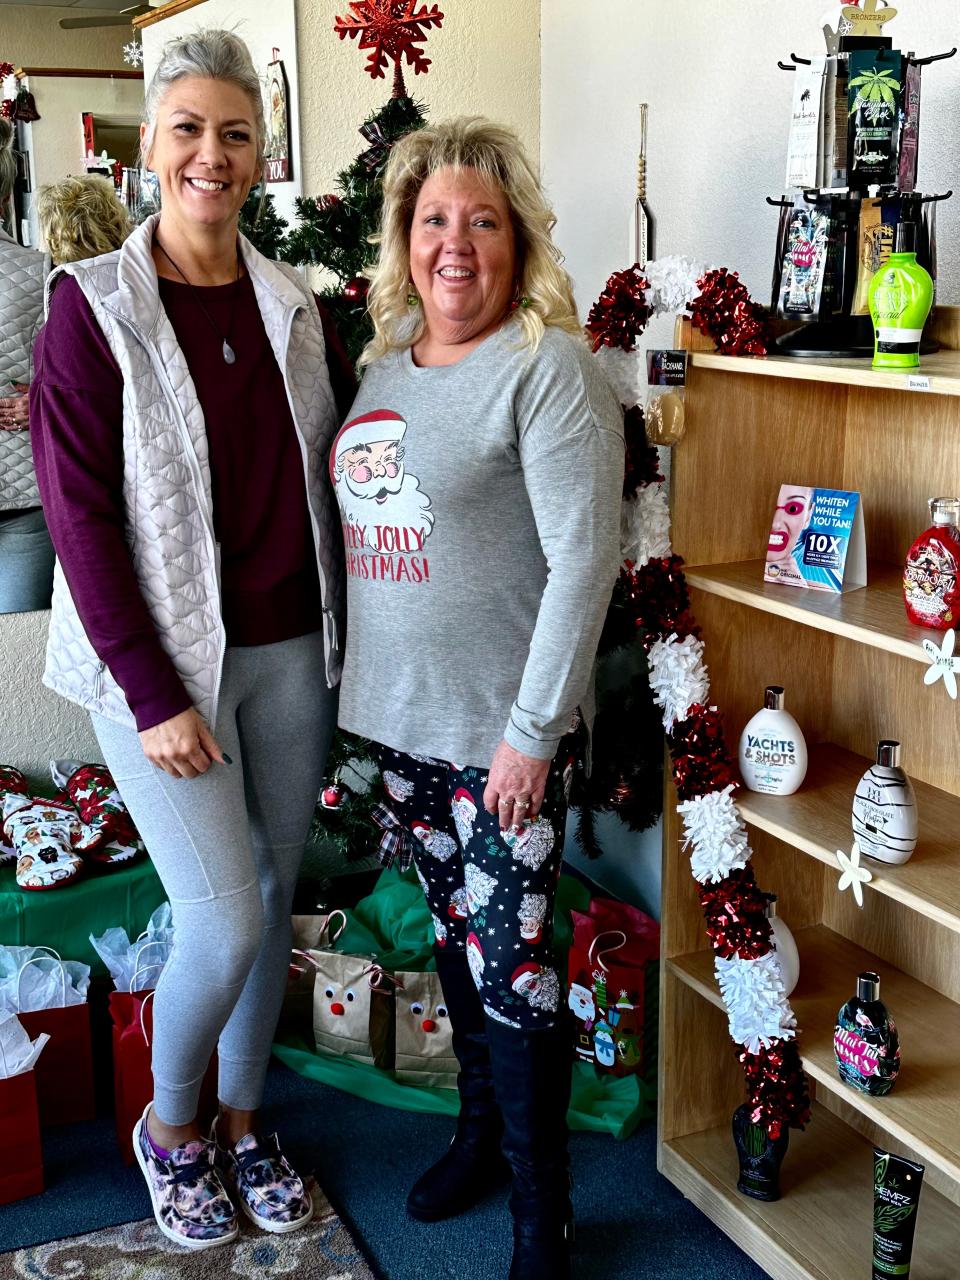 Cabana Tans owners Tani Pollock and Connie Gramm Maestas stand among the the items in their Farmington business being sold or raffled to raise cash for the Four Corners Home for Children.